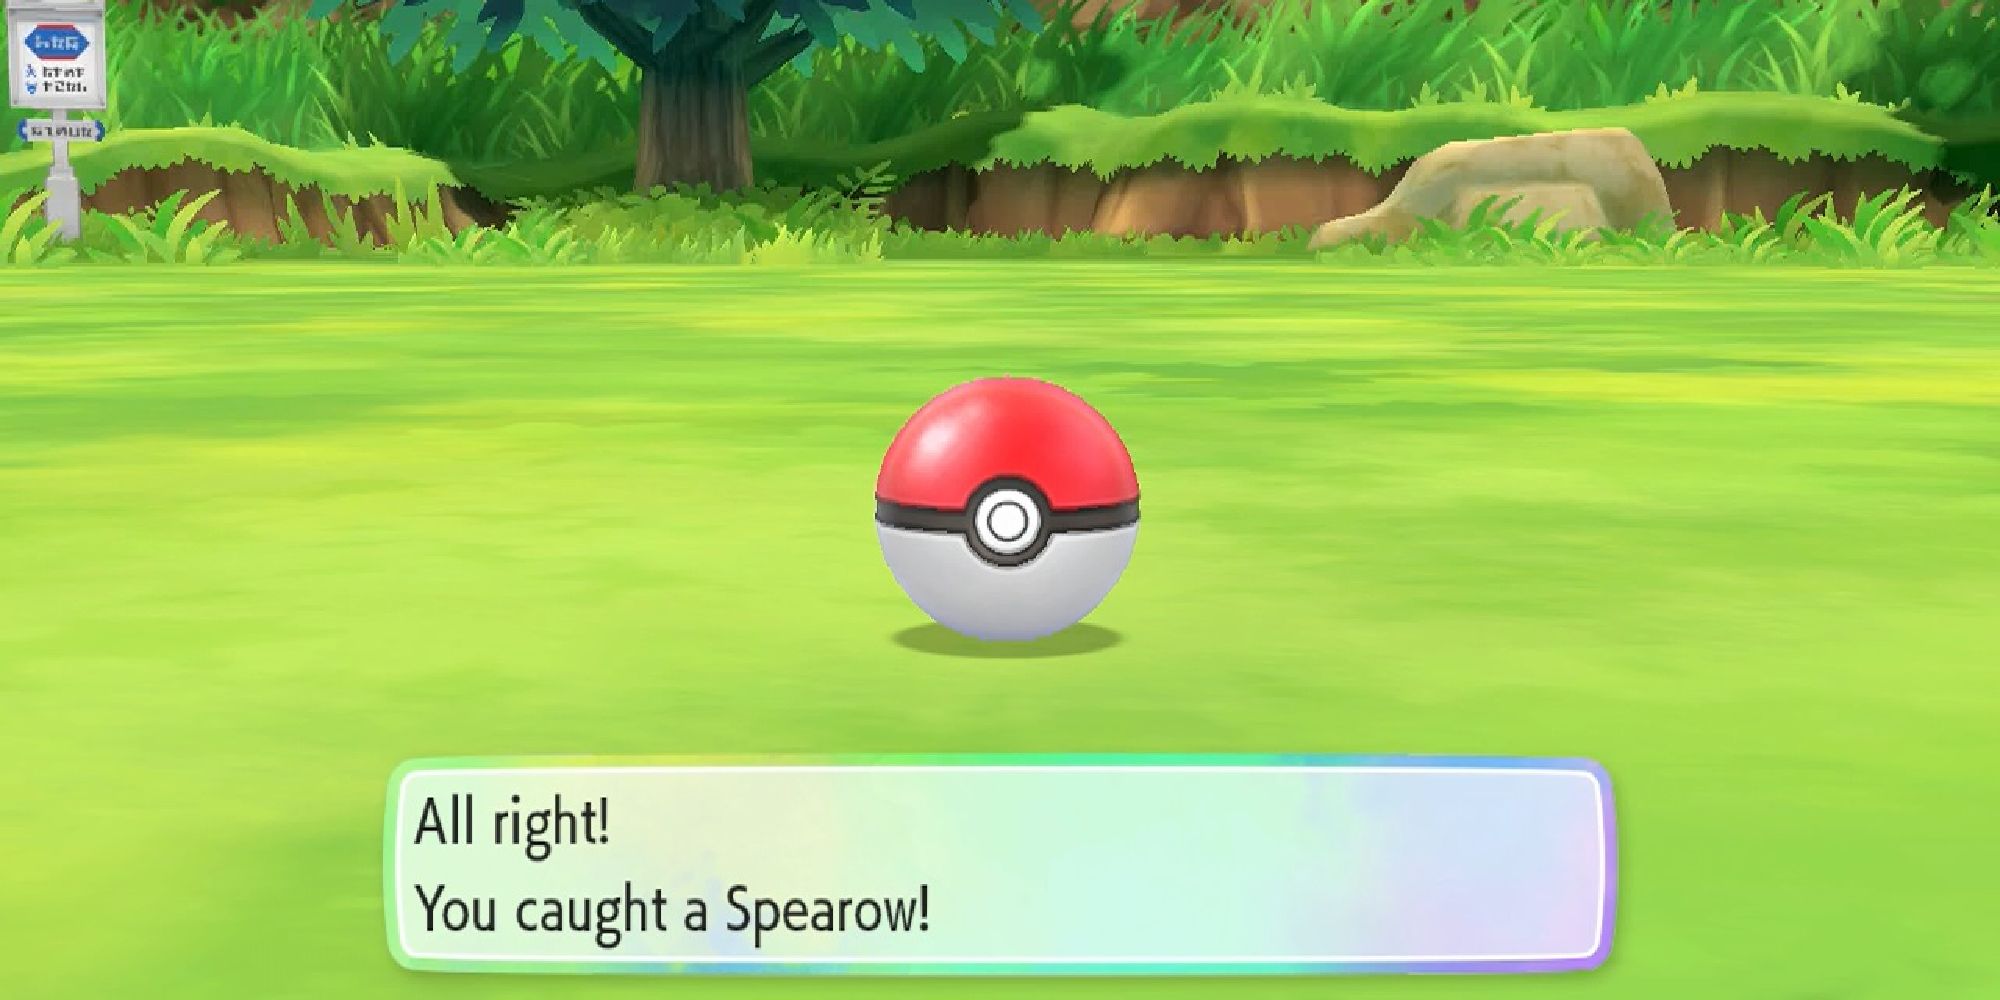 Video Game Sound Effects a wide shot of a PokeBall from Pokemon sat in a grassy field surrounded by trees and a sign off to the left with a text box beneath it 